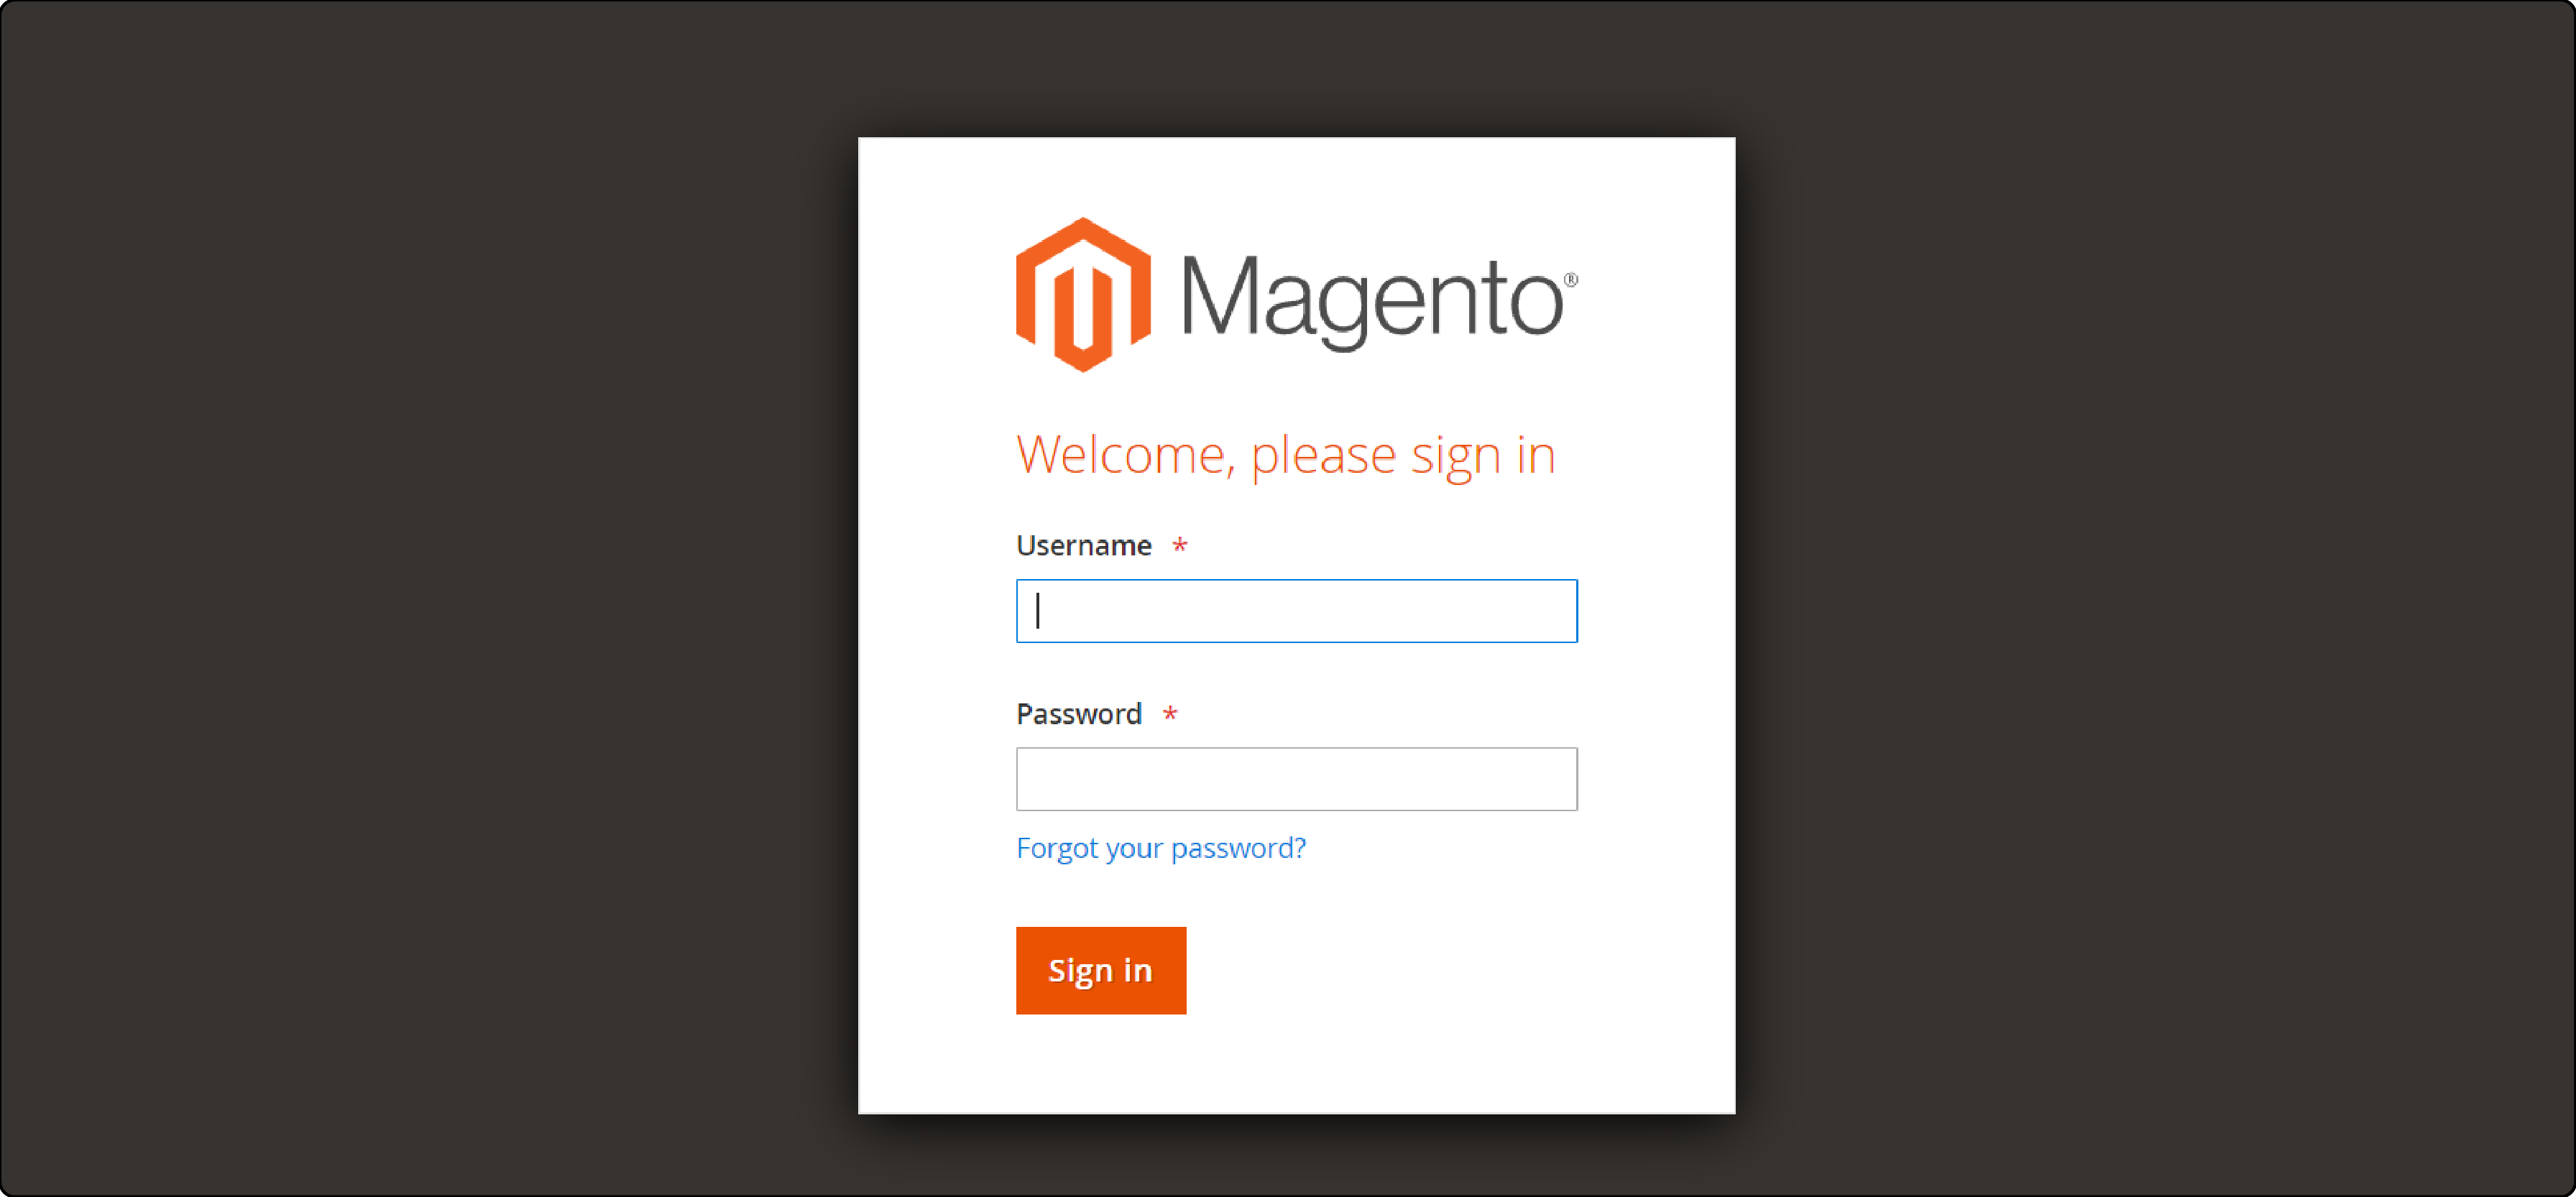 Log In for Magento Admin Notification